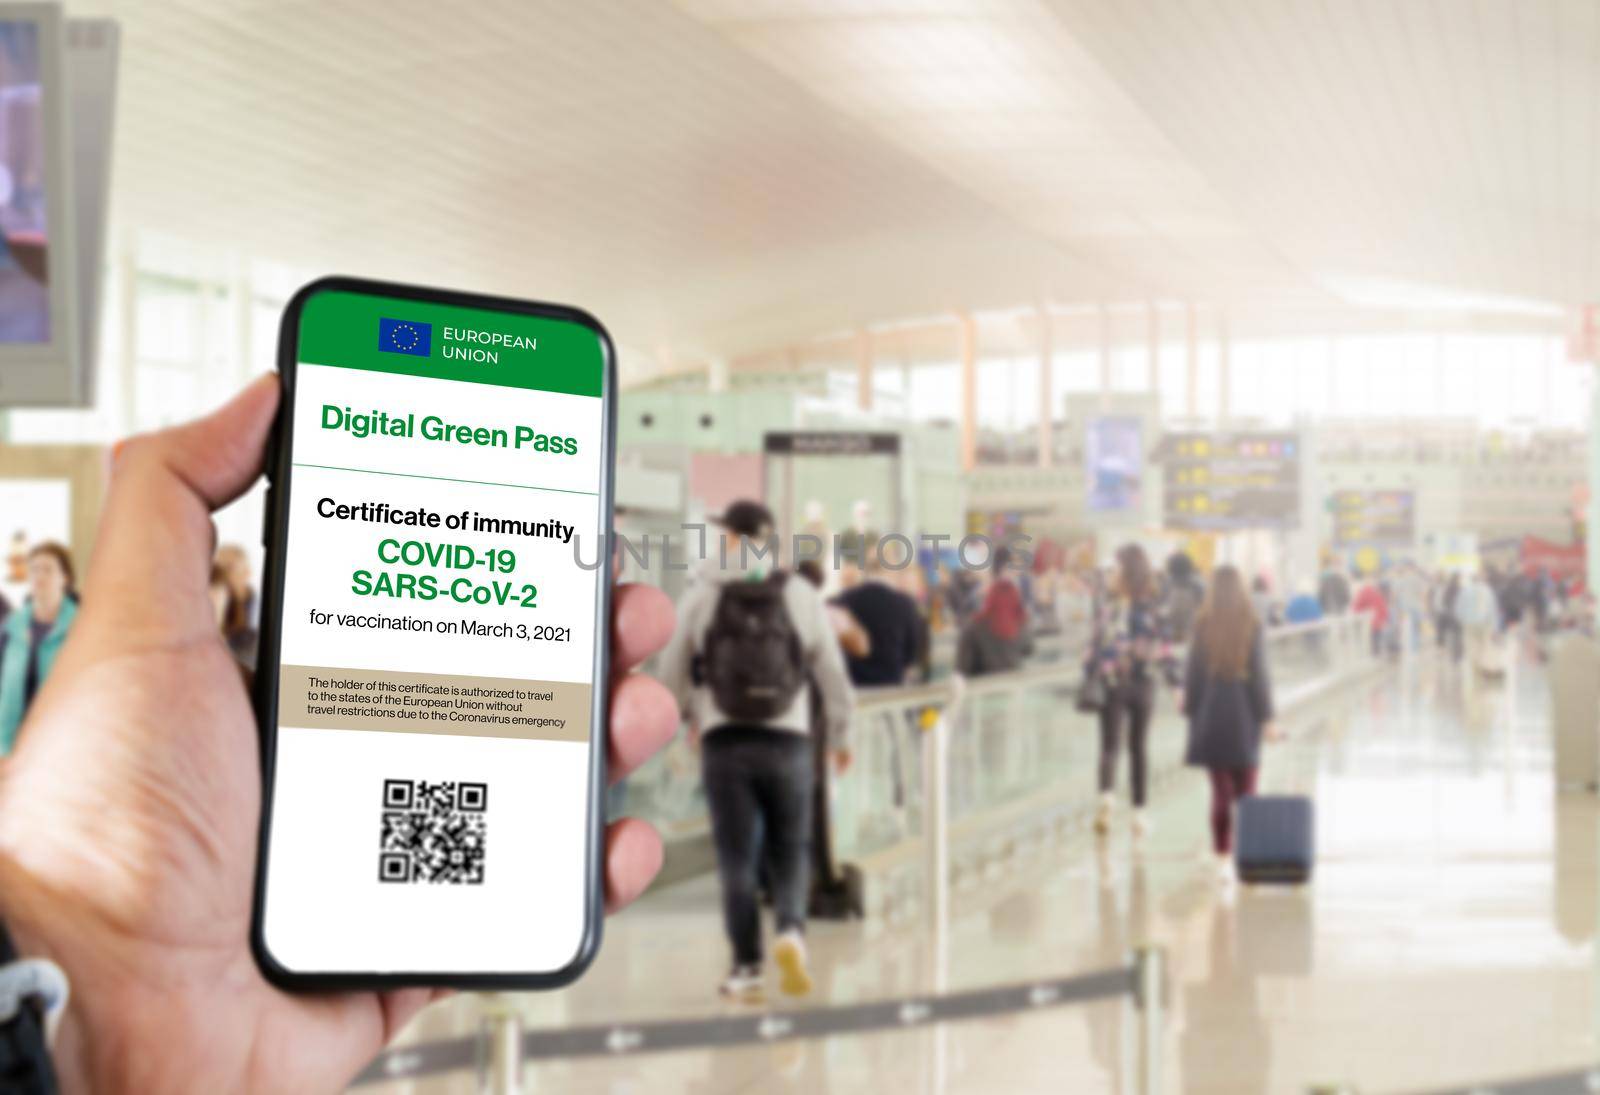 The digital green pass of the european union with the QR code on the screen of a mobile held by a hand with a blurred airport in the background by rarrarorro